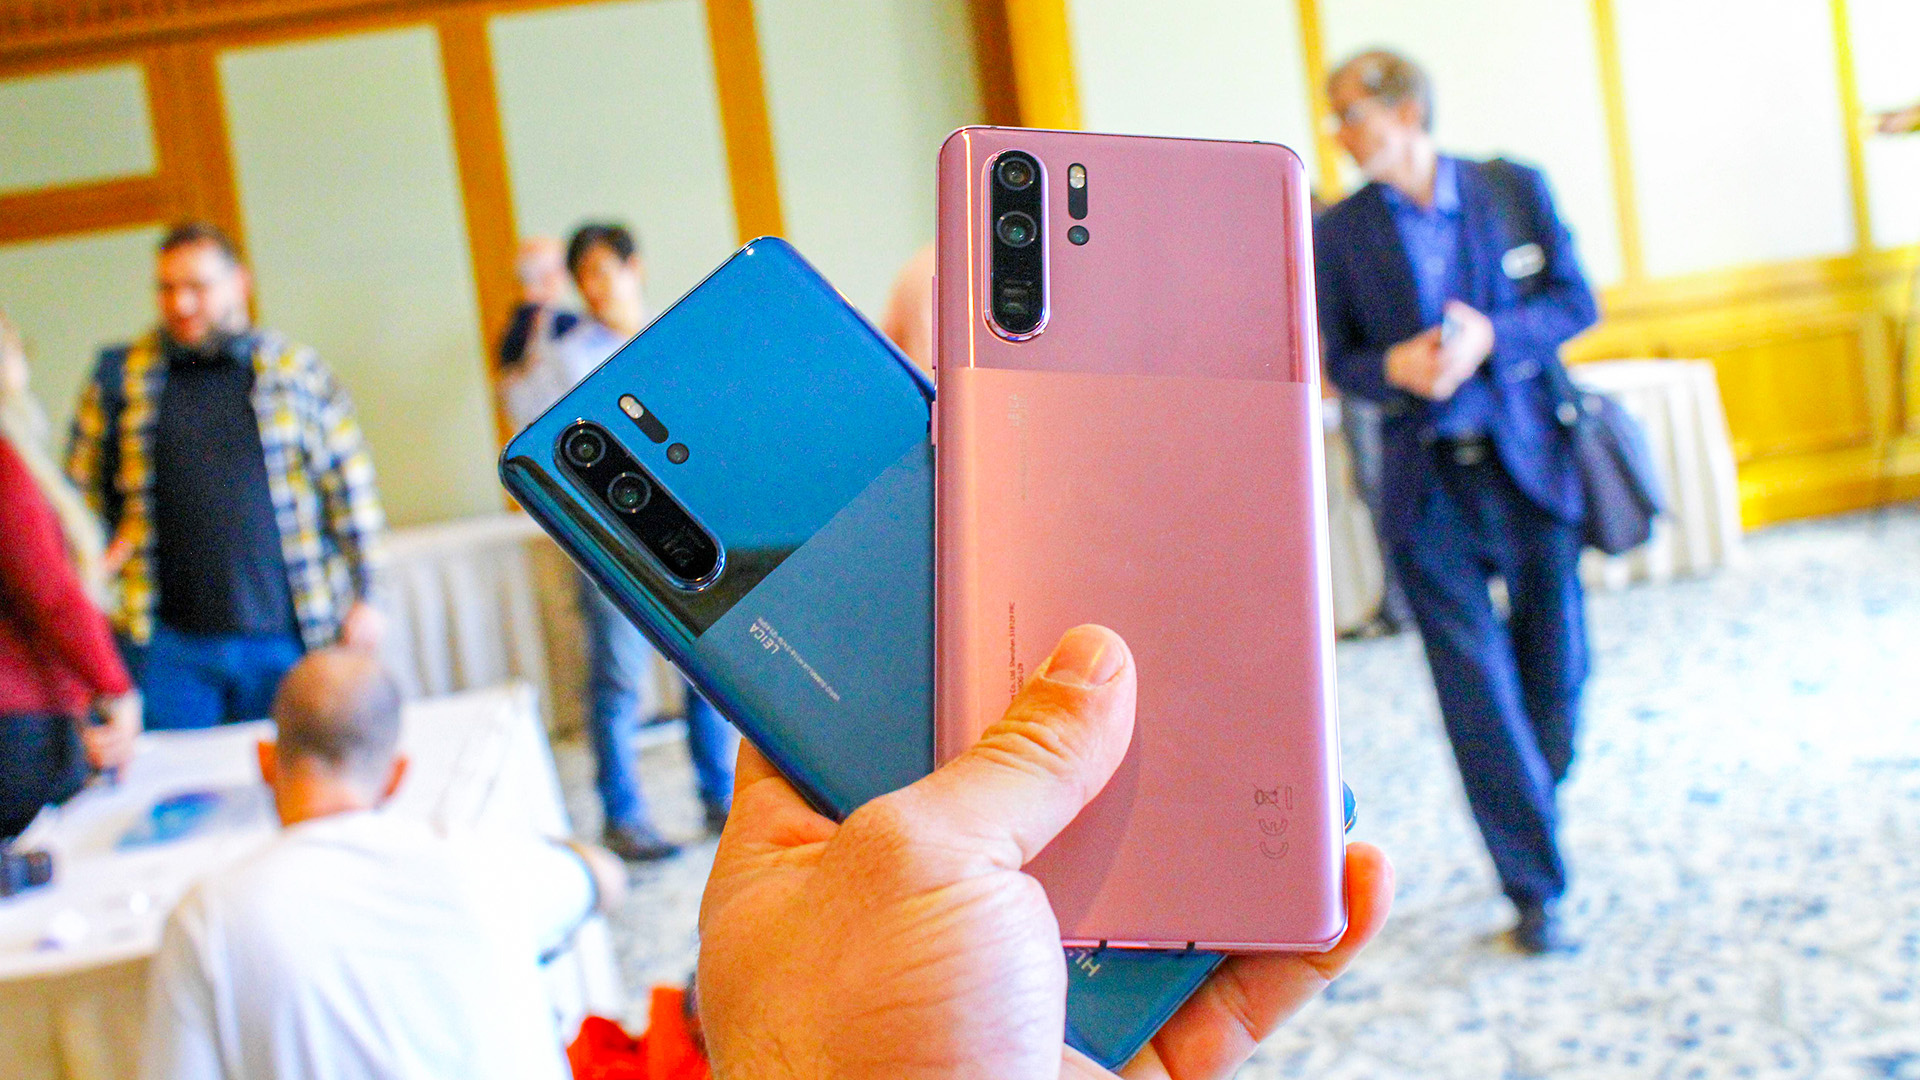 Huawei P30 Pro New Edition smartphone comes with GMS